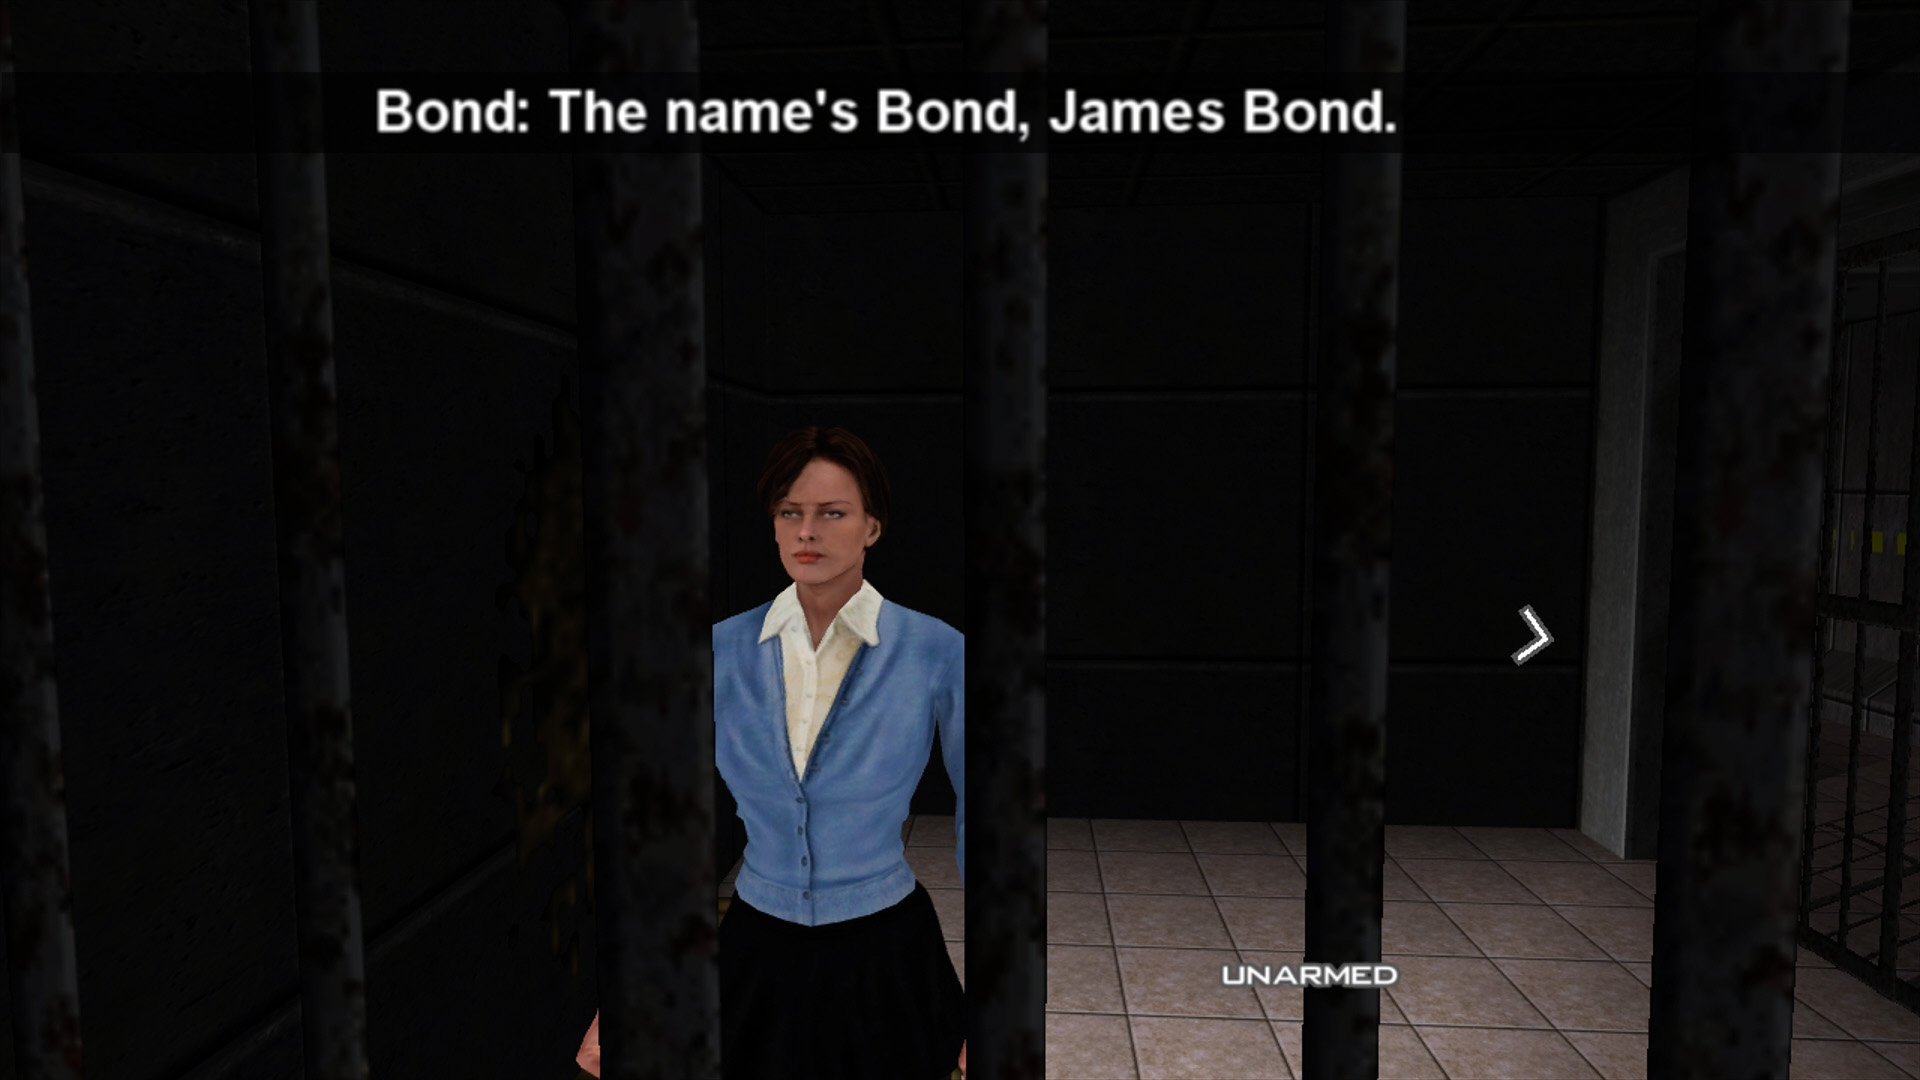 Review: GoldenEye 007 HD is the greatest remaster you'll likely